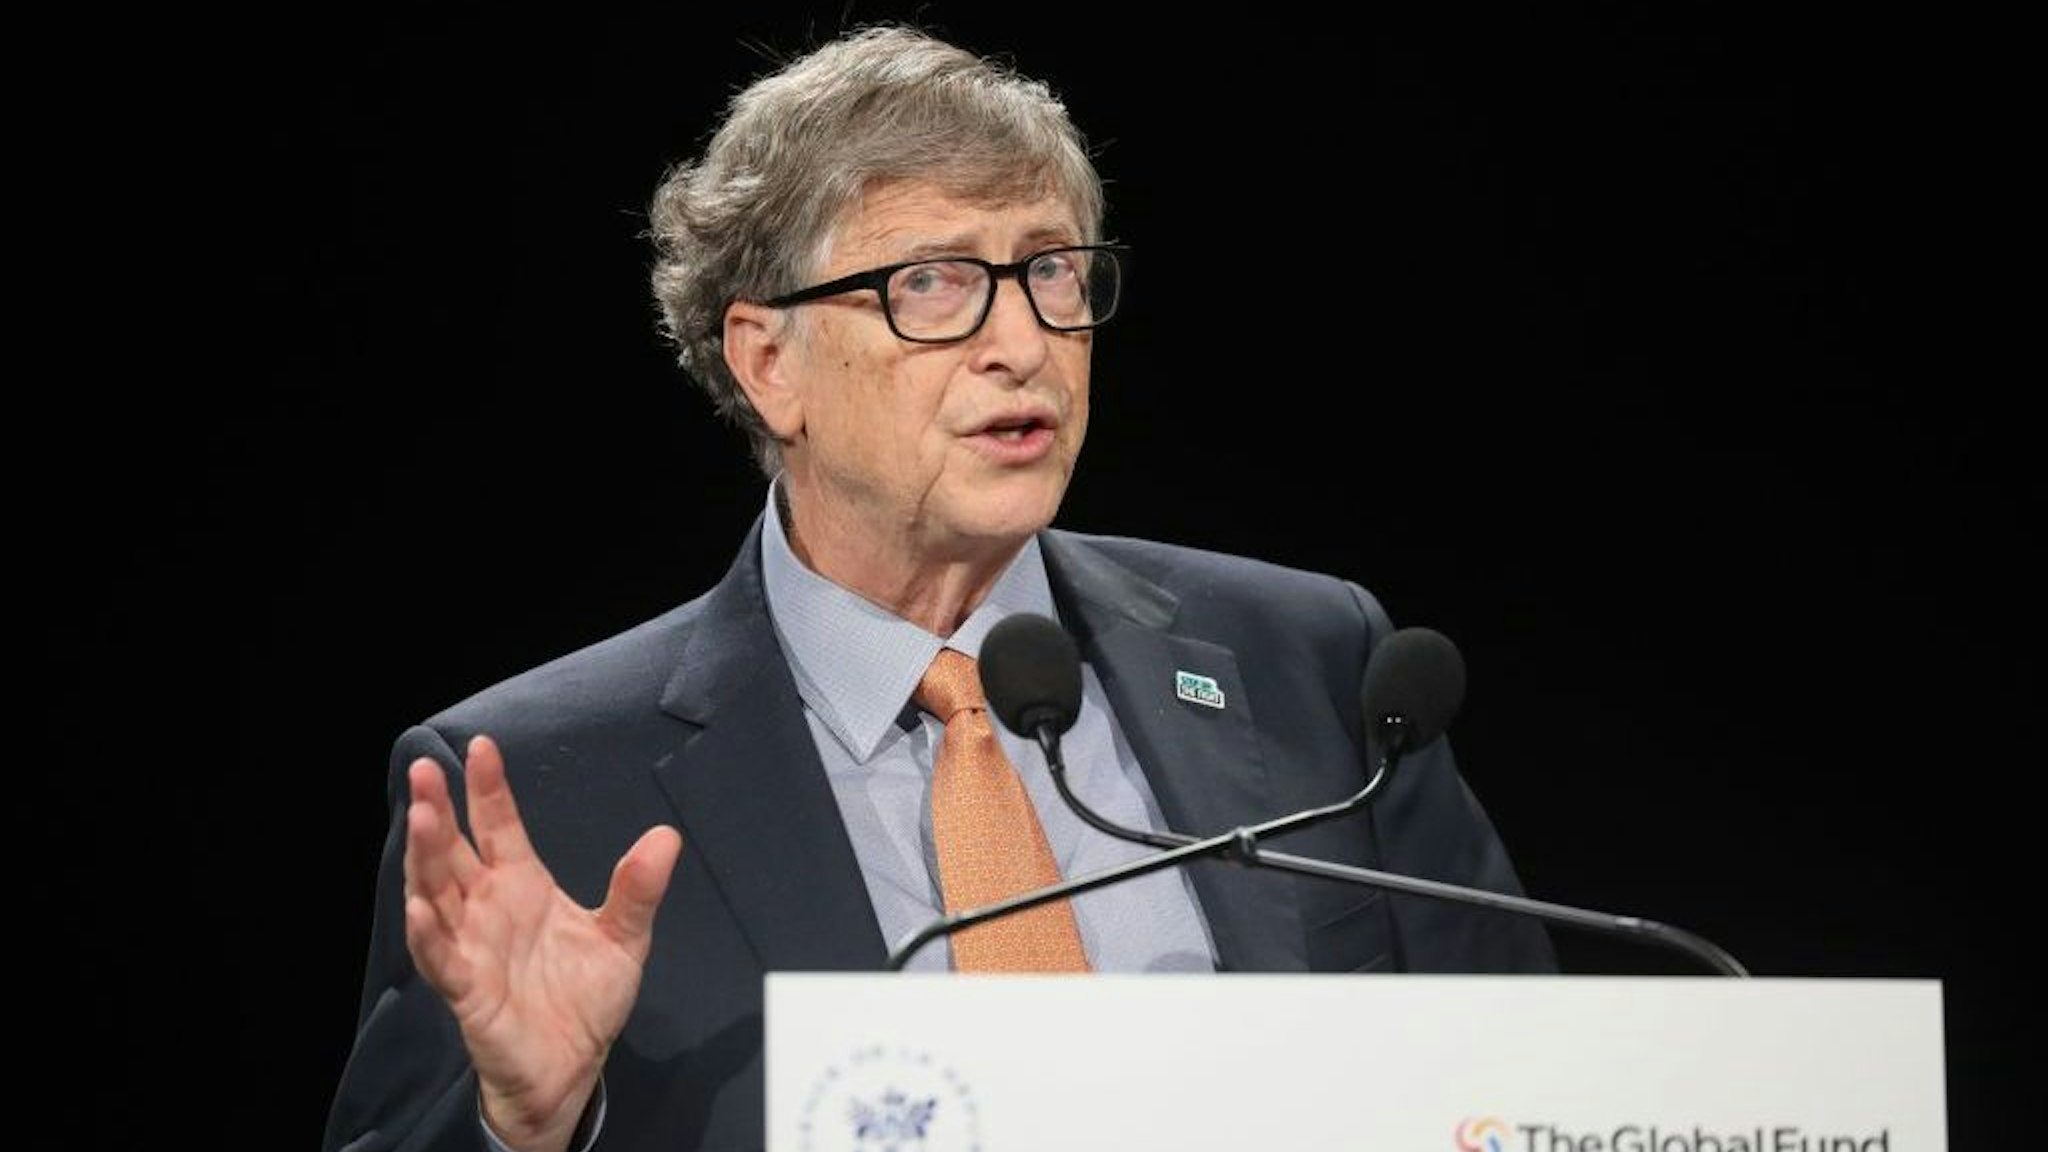 Microsoft founder, Co-Chairman of the Bill & Melinda Gates Foundation, Bill Gates delivers a speech during the conference of Global Fund to Fight HIV, Tuberculosis and Malaria on october 10, 2019, in Lyon, central eastern France. - The Global Fund to Fight AIDS, Tuberculosis and Malaria opened a drive to raise $14 billion to fight a global epidemics but face an uphill battle in the face of donor fatigue. (Photo by Ludovic MARIN / AFP) (Photo by LUDOVIC MARIN/AFP via Getty Images)